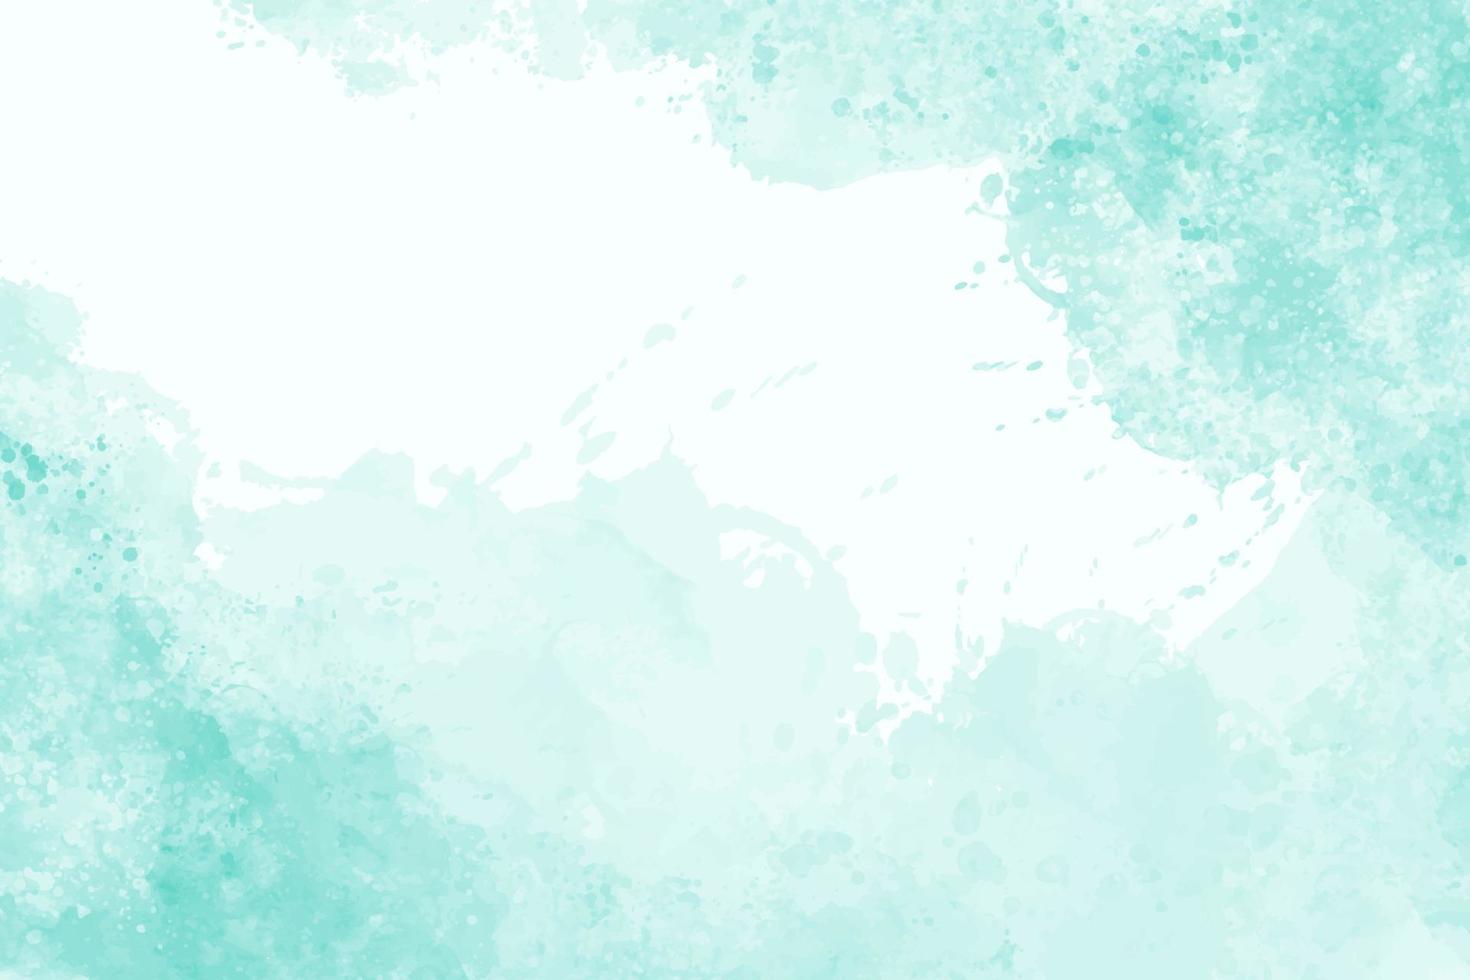 Mint abstract watercolor texture background vector